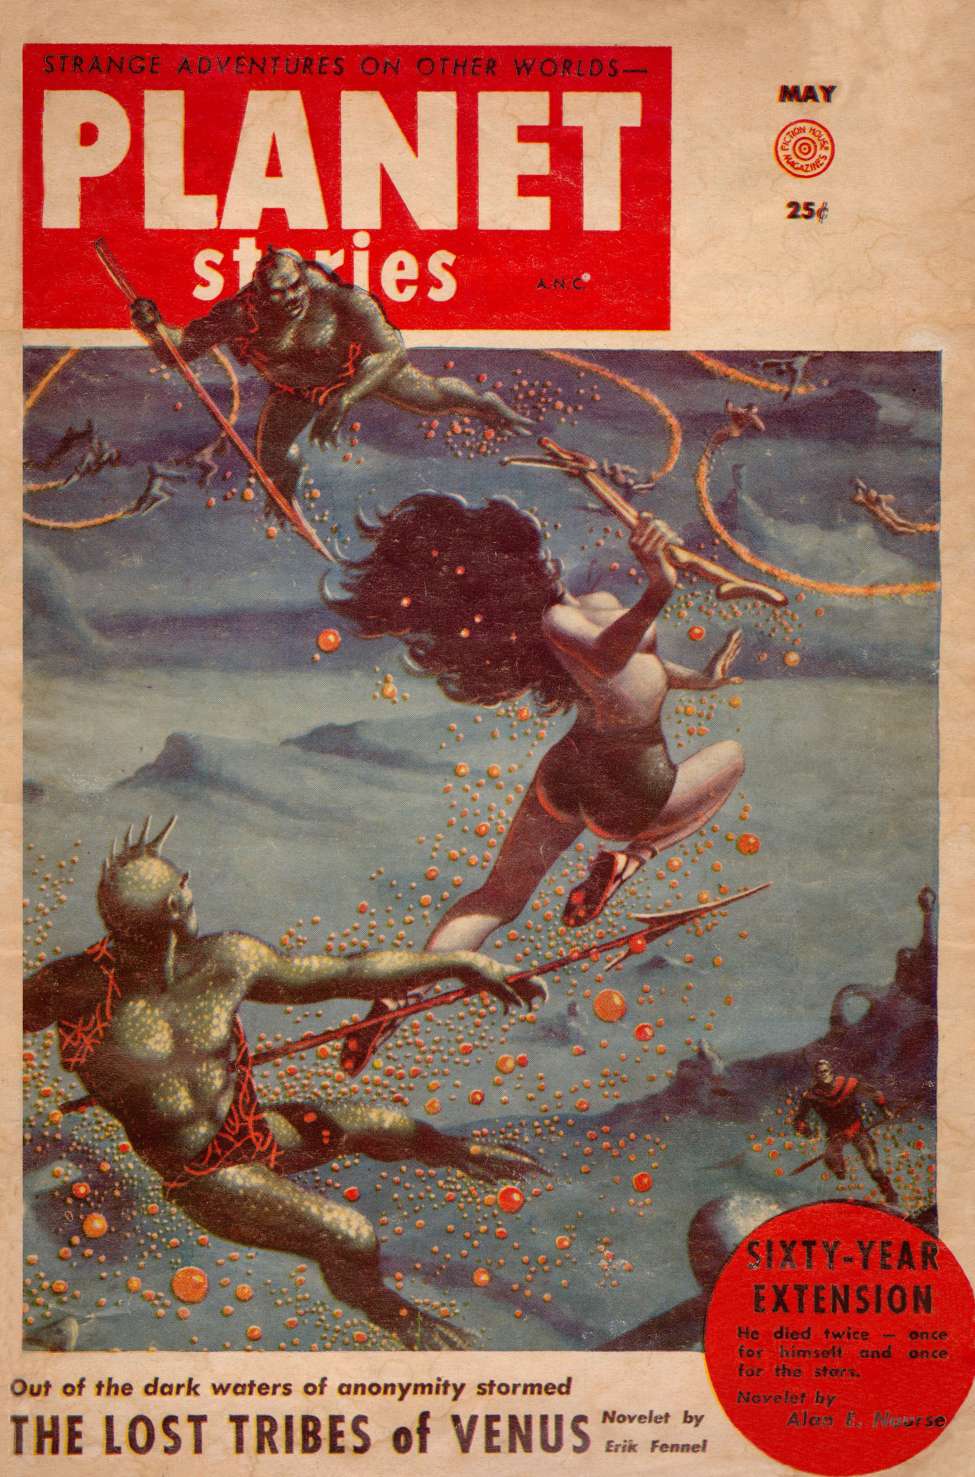 Book Cover For Planet Stories v6 6 - The Lost Tribes of Venus - Erik Fennel